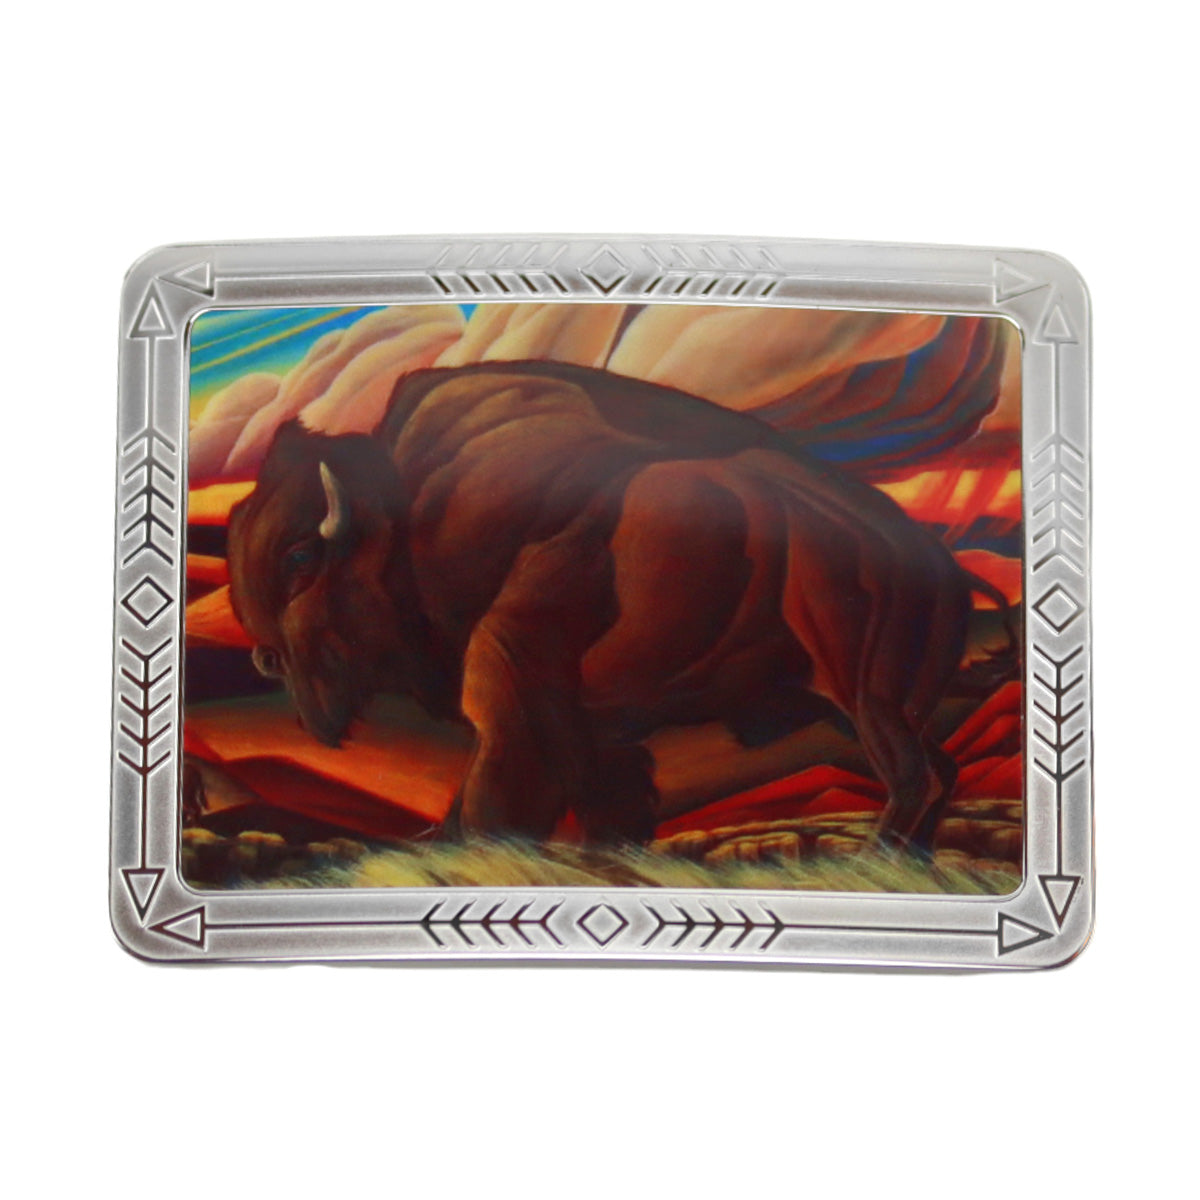 William Haskell - Stainless Steel and Baked Enamel Buffalo Belt Buckle